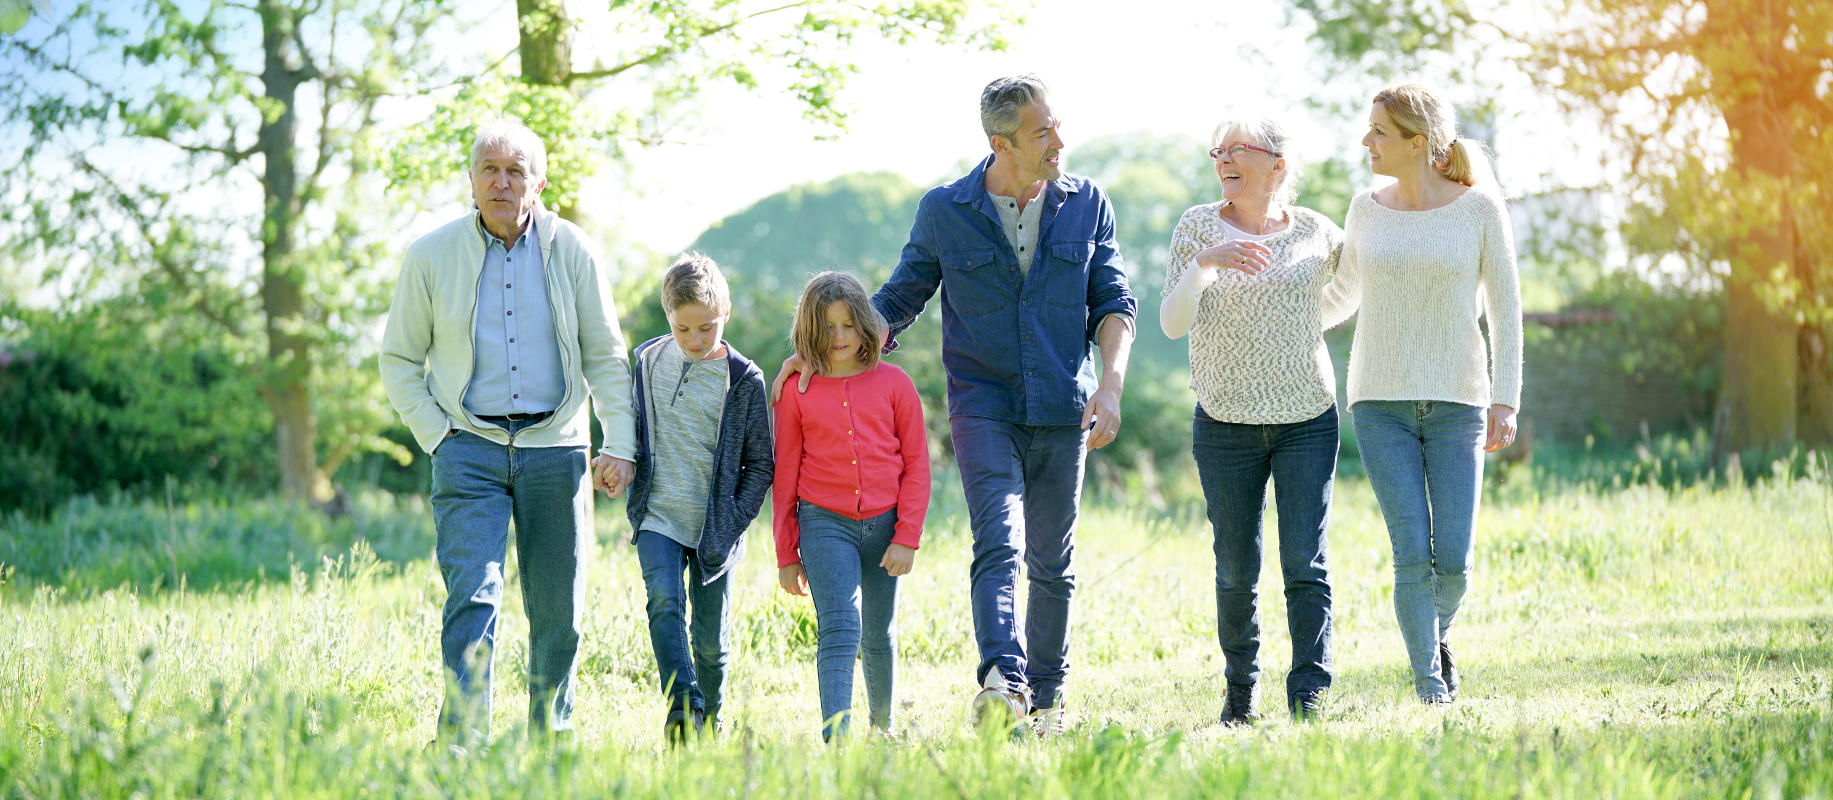 NaturalFit; Dentures & Denture Care: About Us Page: Family Walking in Field